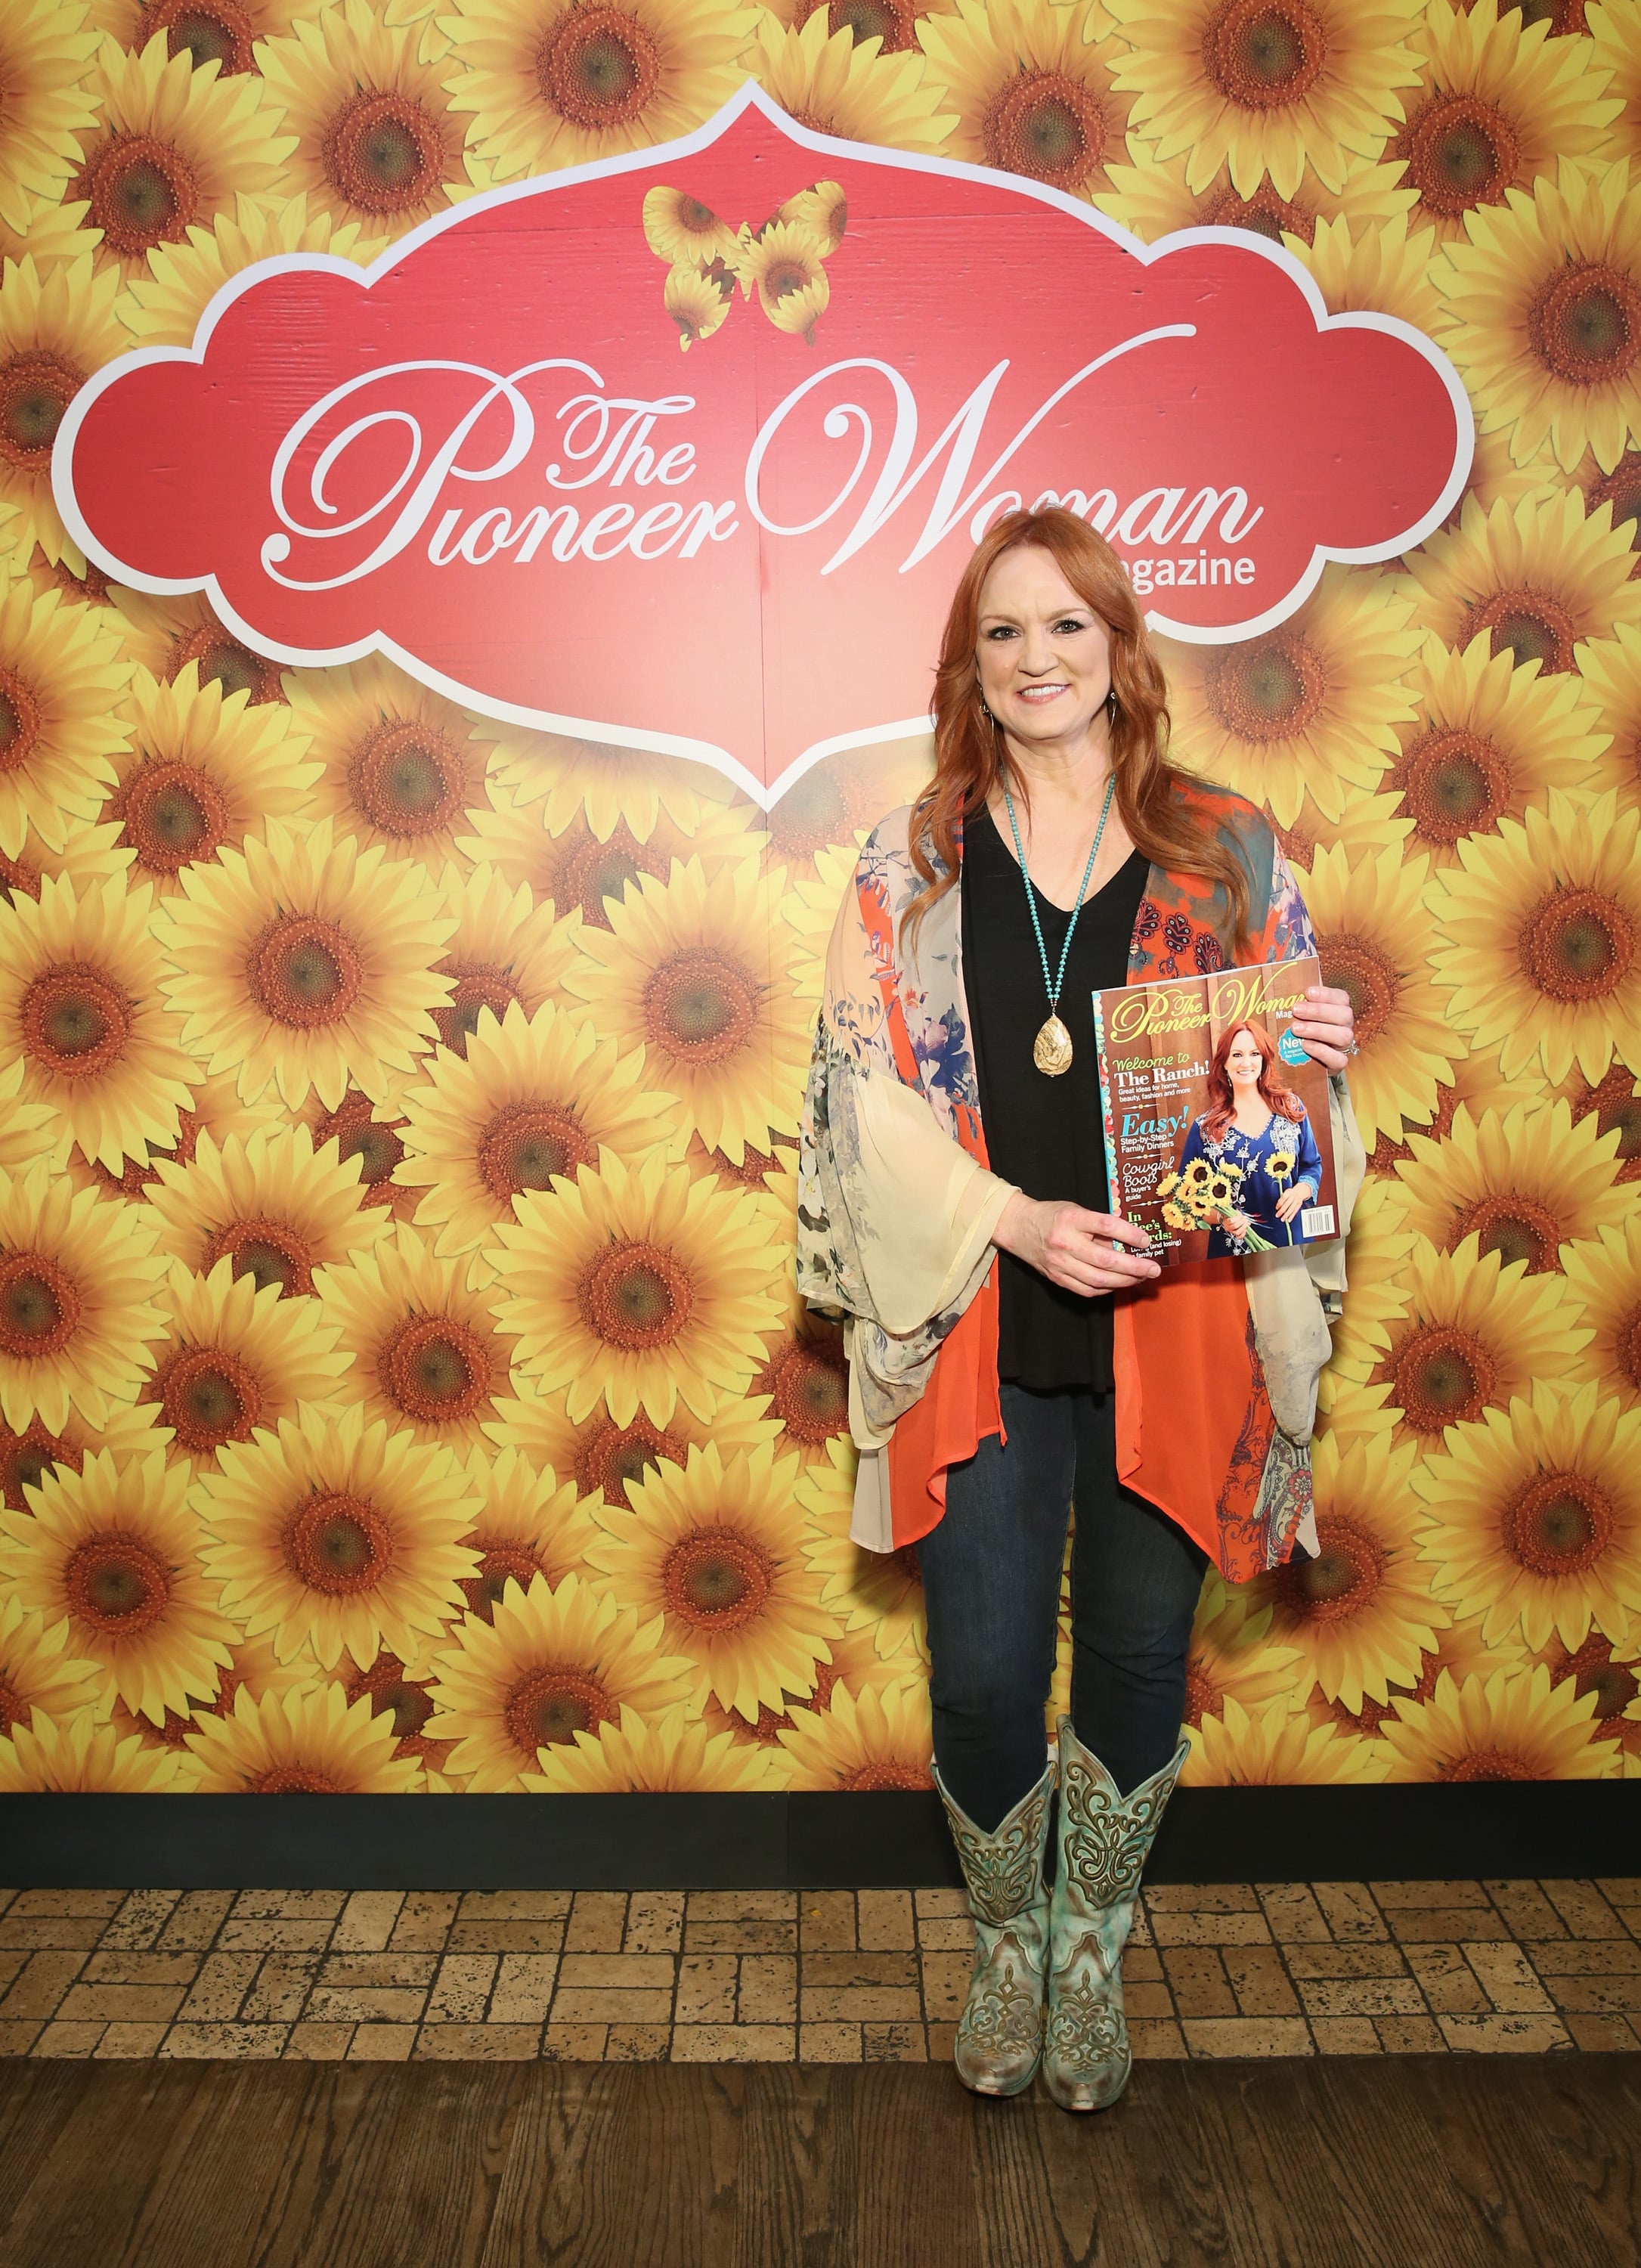 The Pioneer Woman Western Boots - Where to Buy Ree Drummond's Cowboy Boots  at Walmart